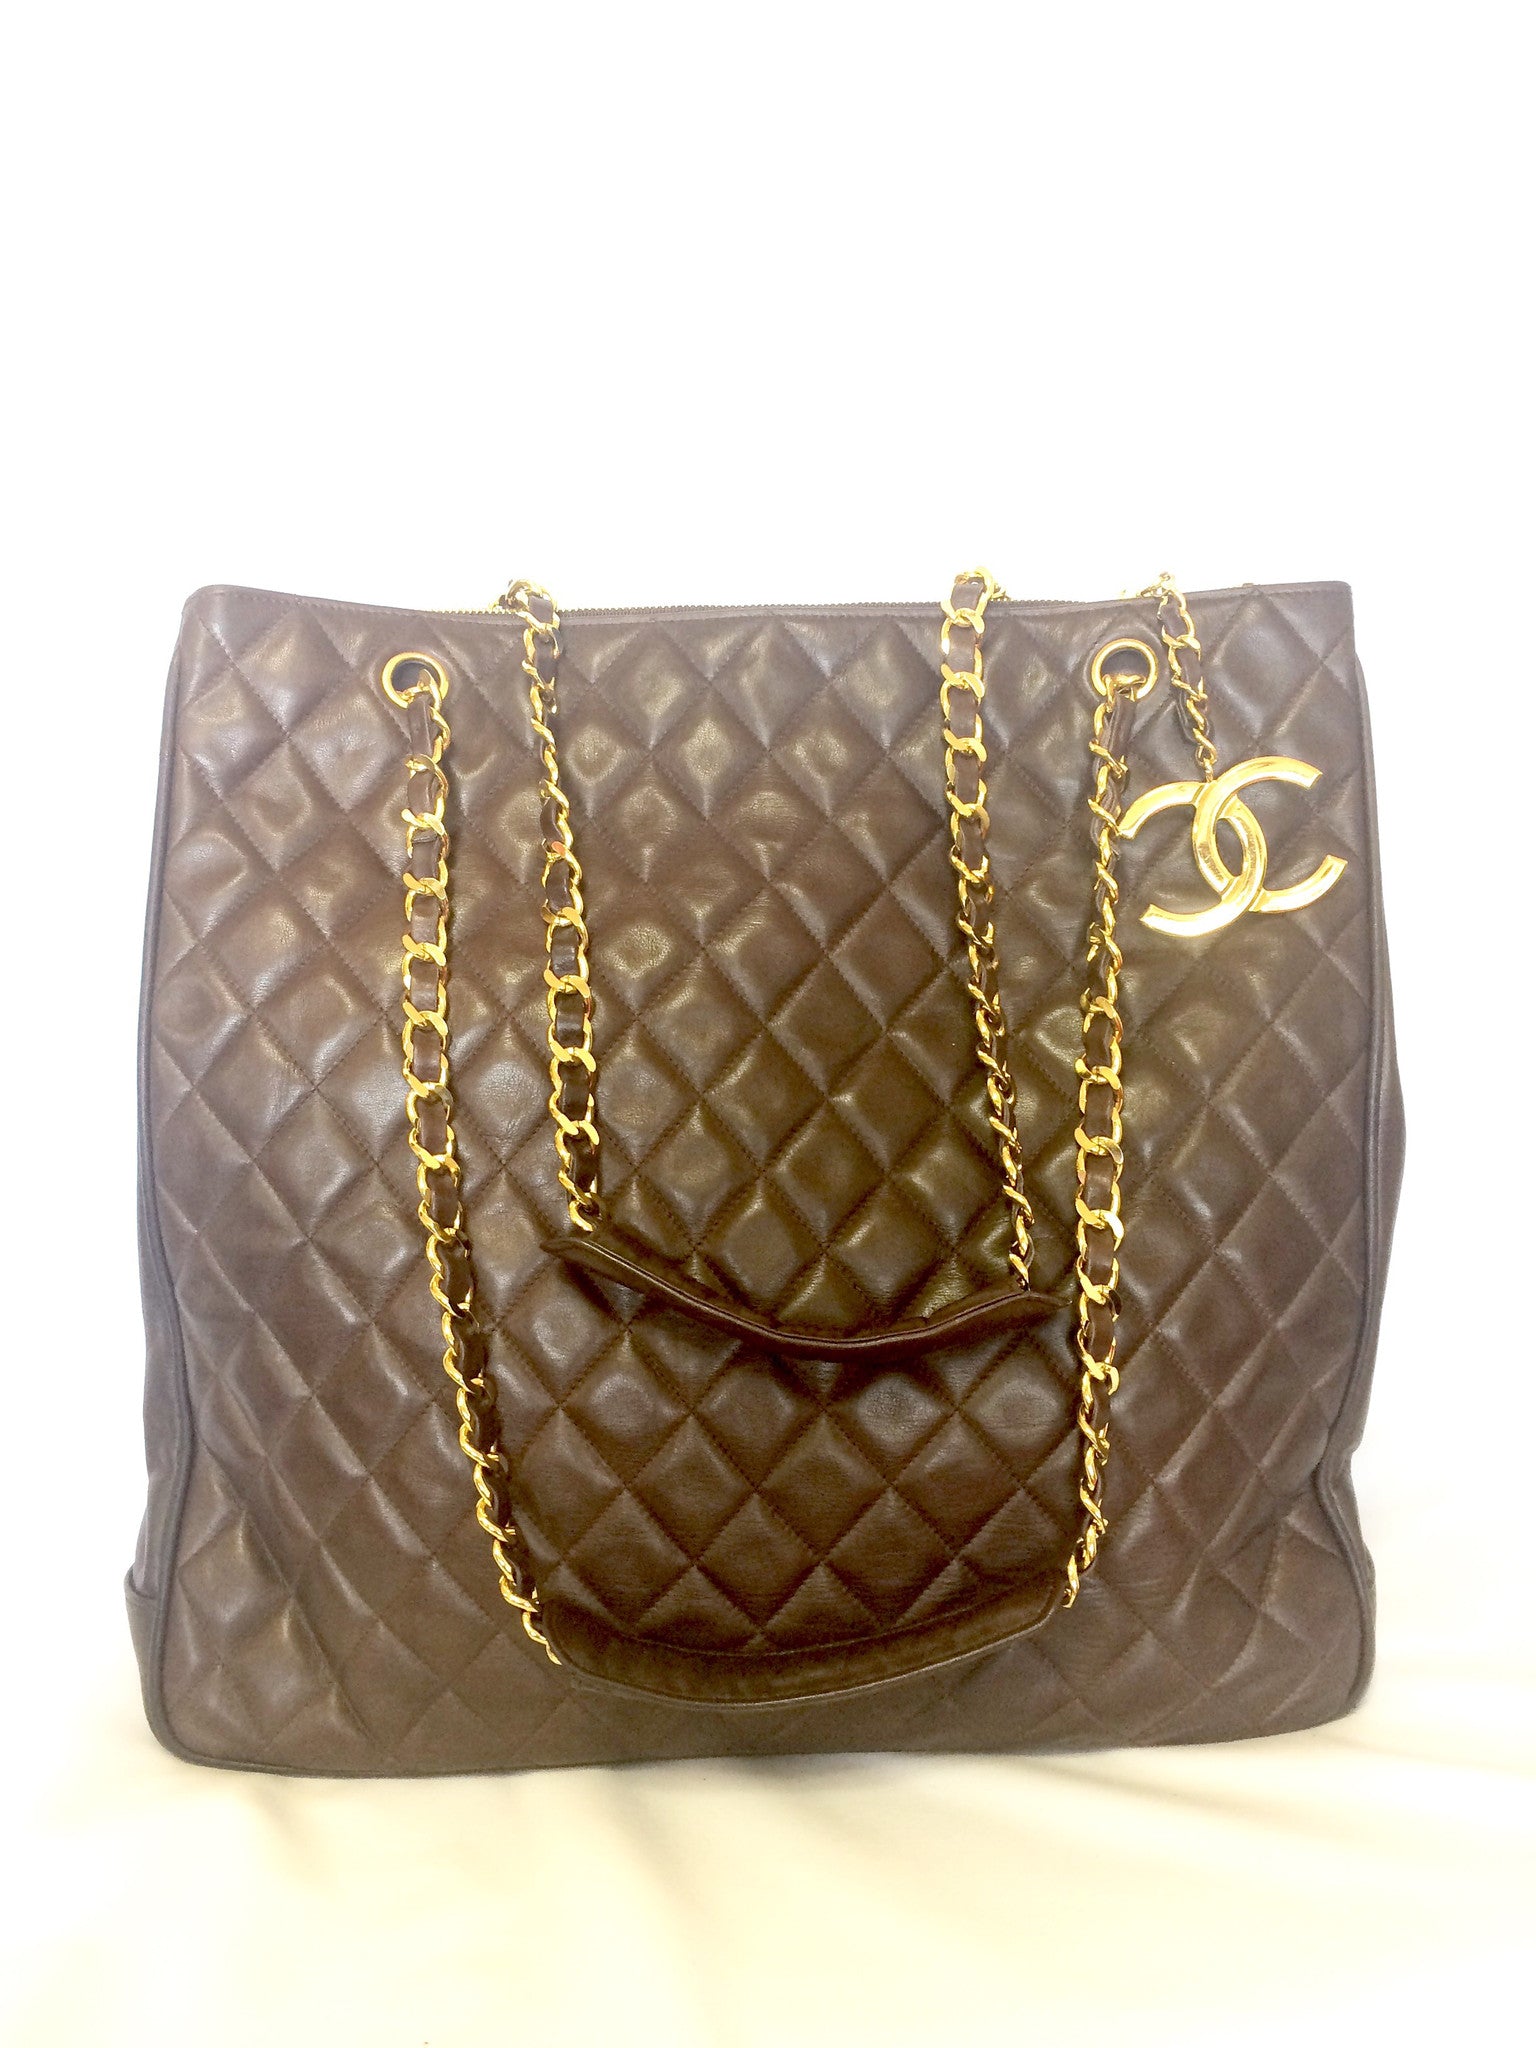 Vintage CHANEL brown lambskin large tote bag with gold tone chains